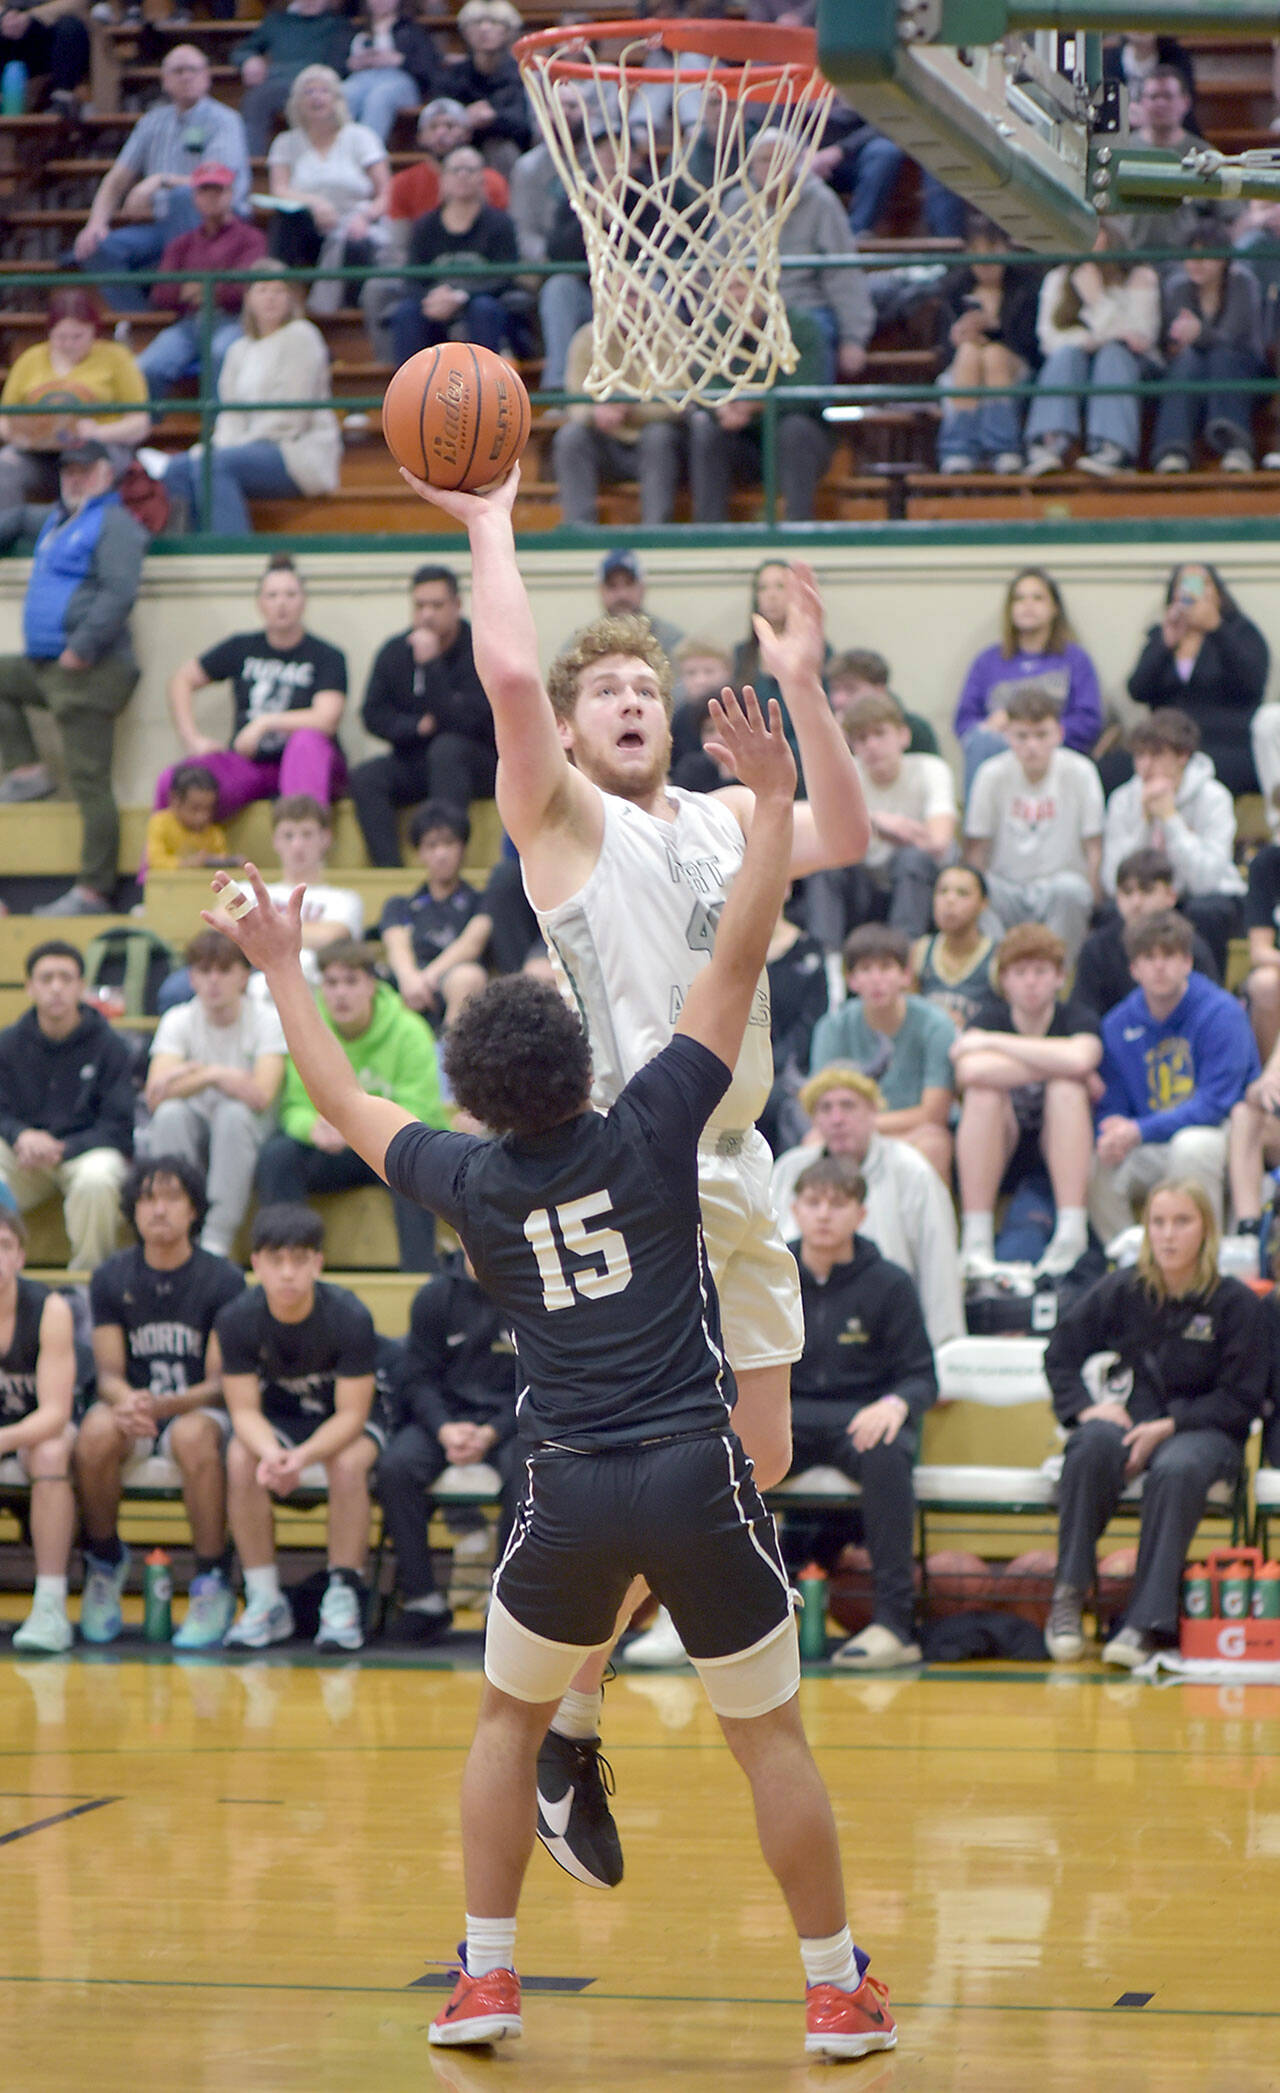 Port Angeles’ Isaiah Shamp aims for the rim as North Kitsap’s Jordan Williams defends the lane on Tuesday night at Port Angeles High School. (Keith Thorpe/Peninsula Daily News)